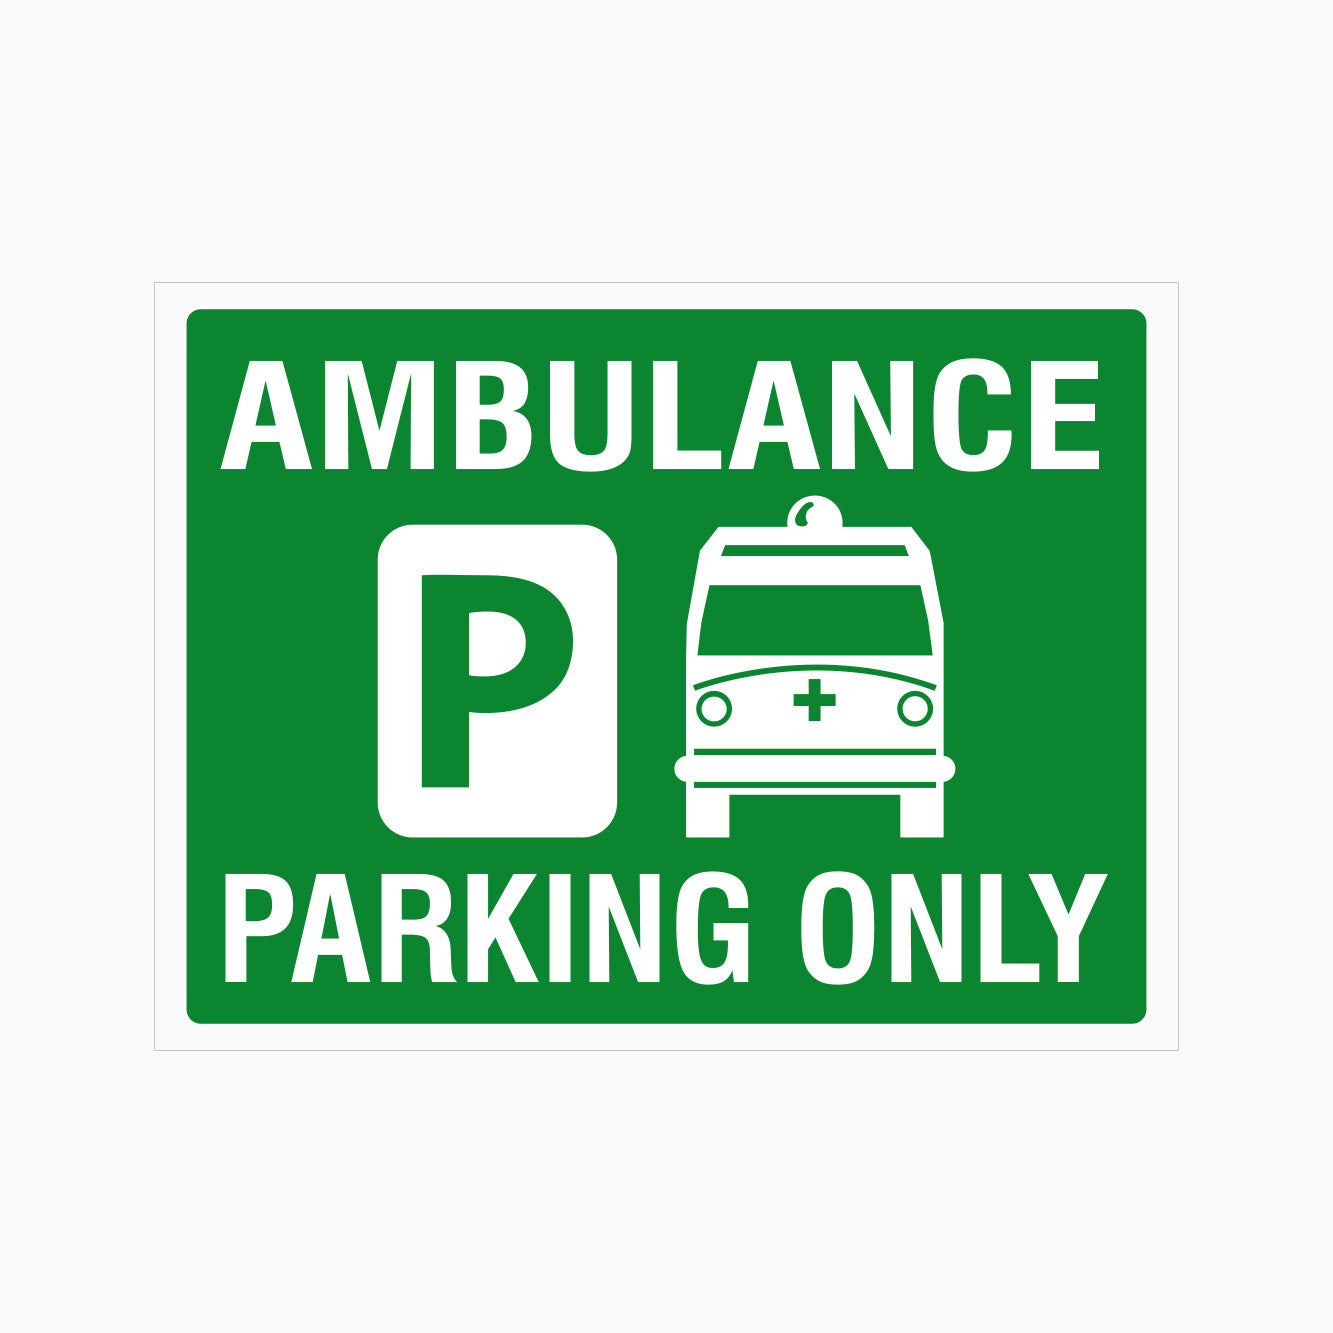 AMBULANCE PARKING ONLY SIGN - GET SIGNS